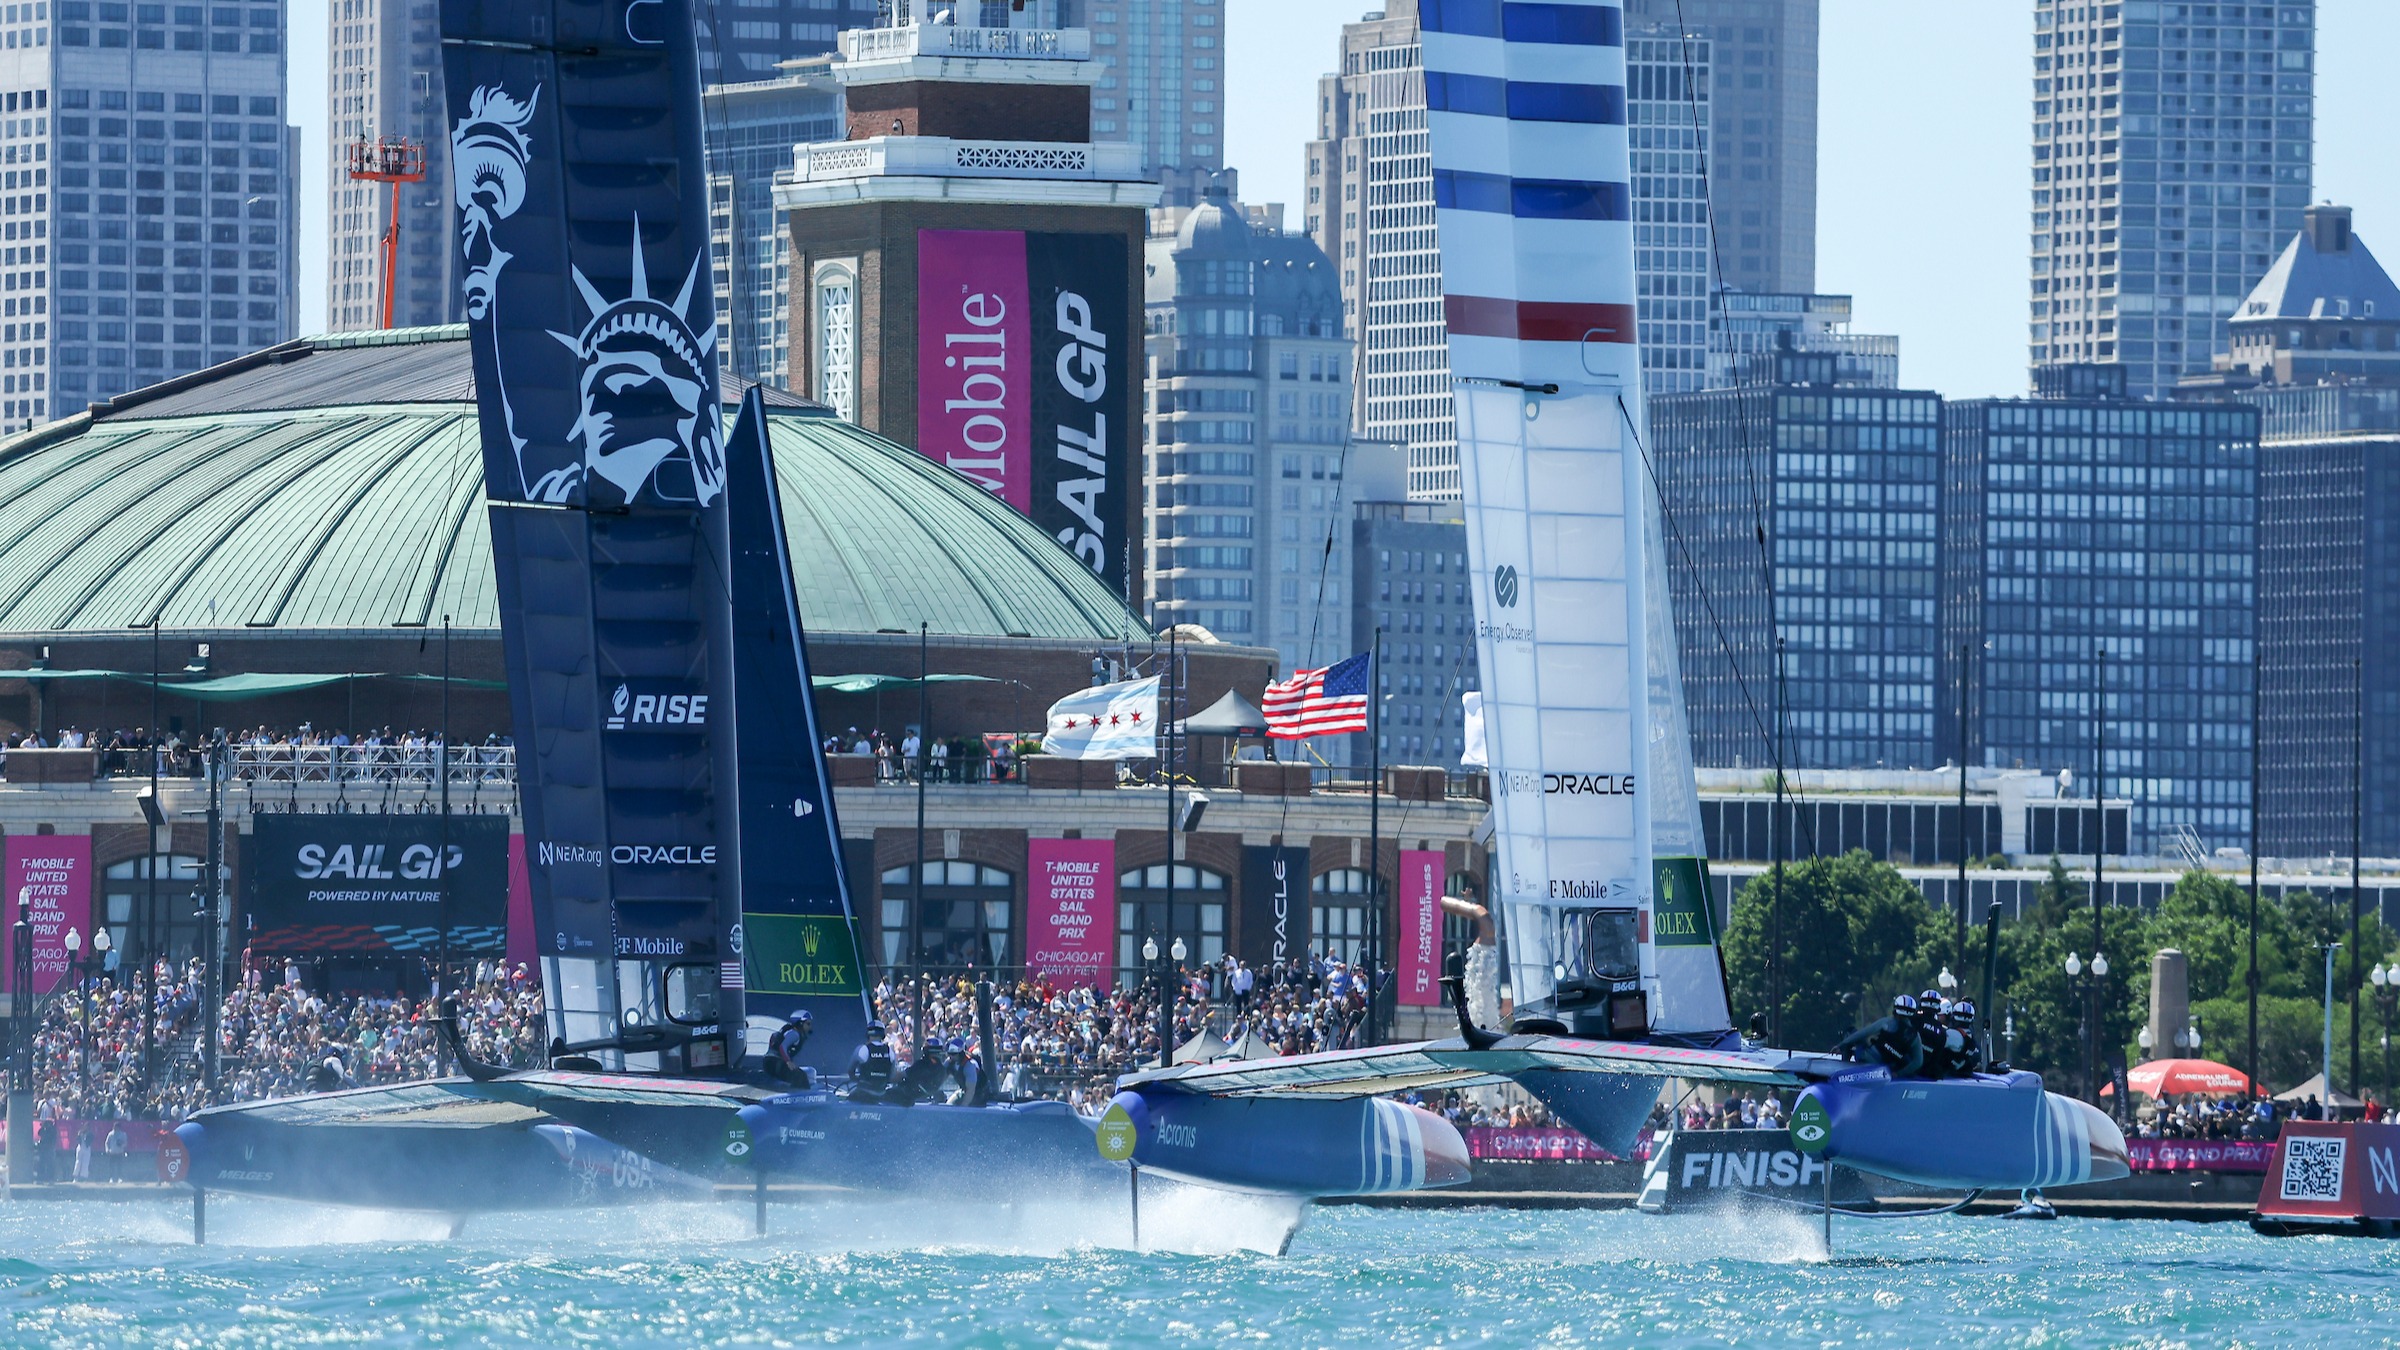 Season 4 // France SailGP Team // France and USA F50s in Chicago S3